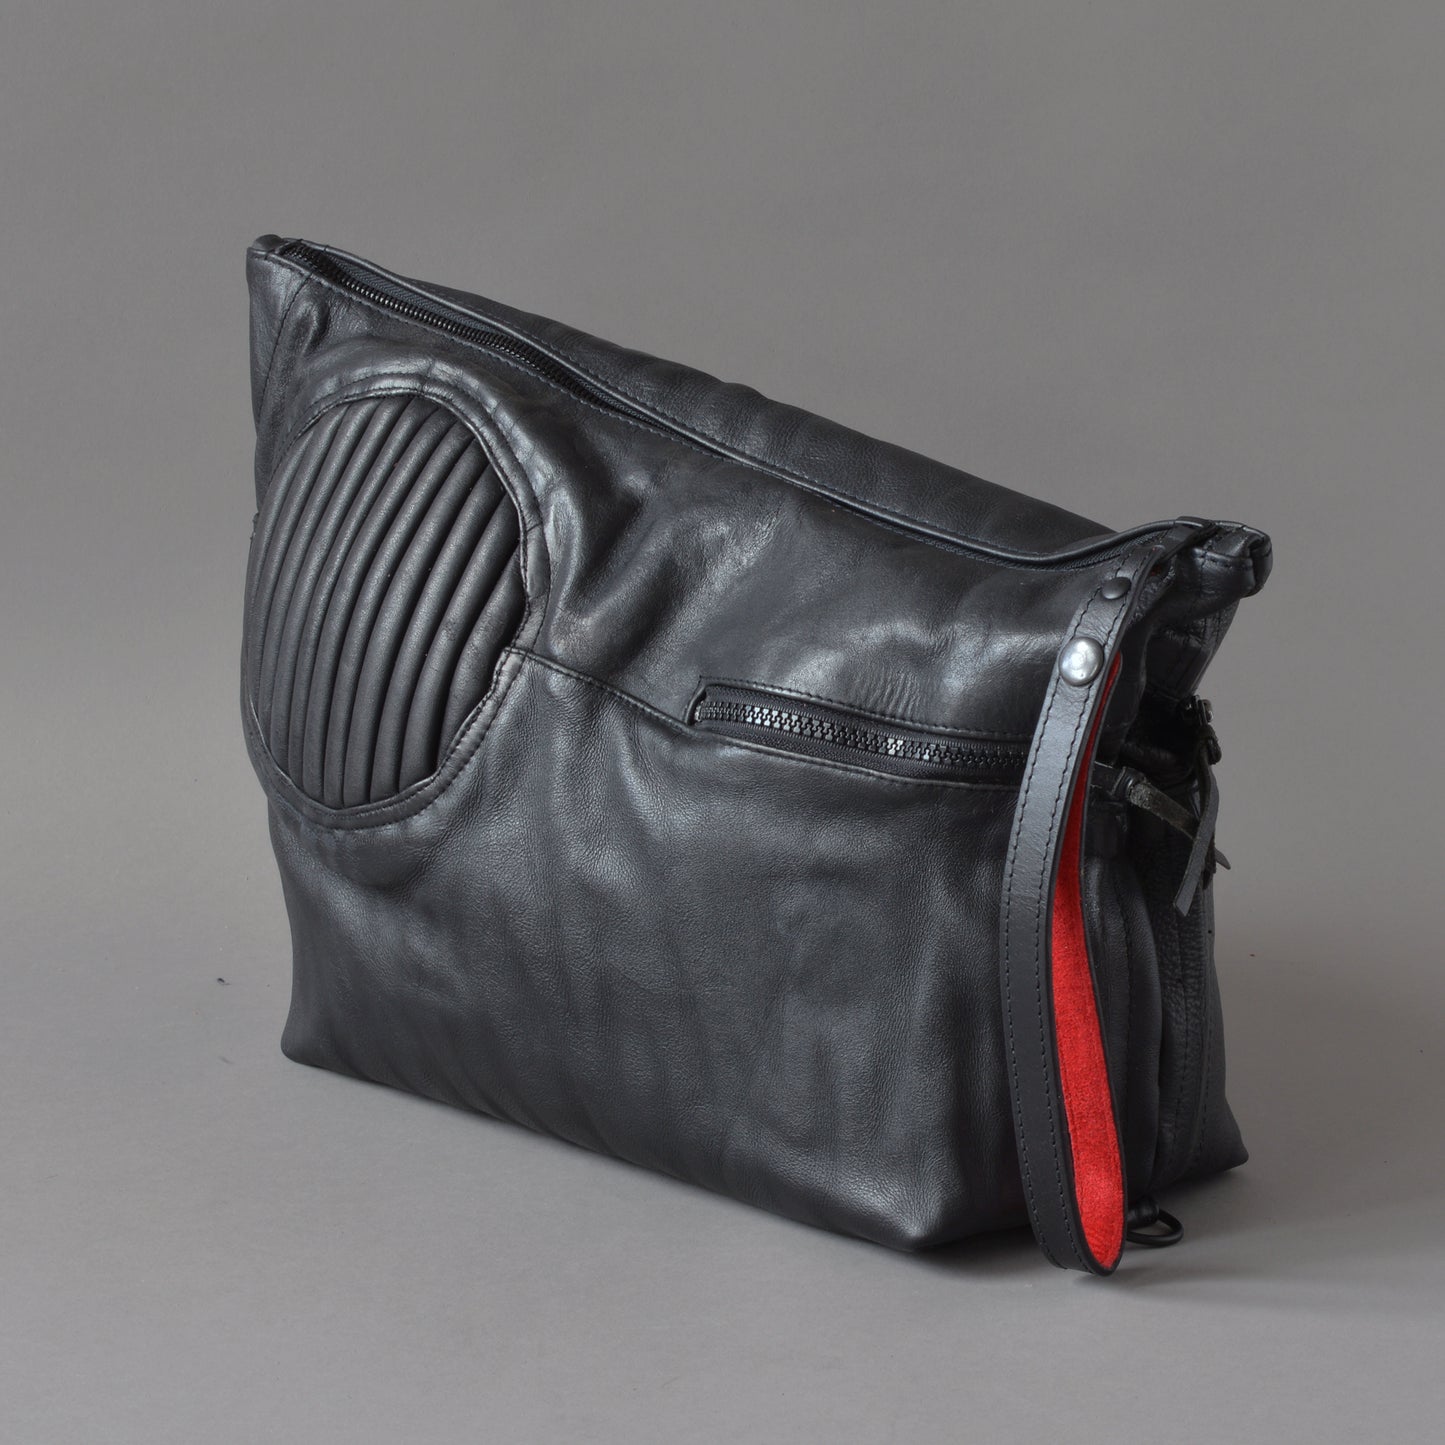 Lewis Leathers Clutch #012